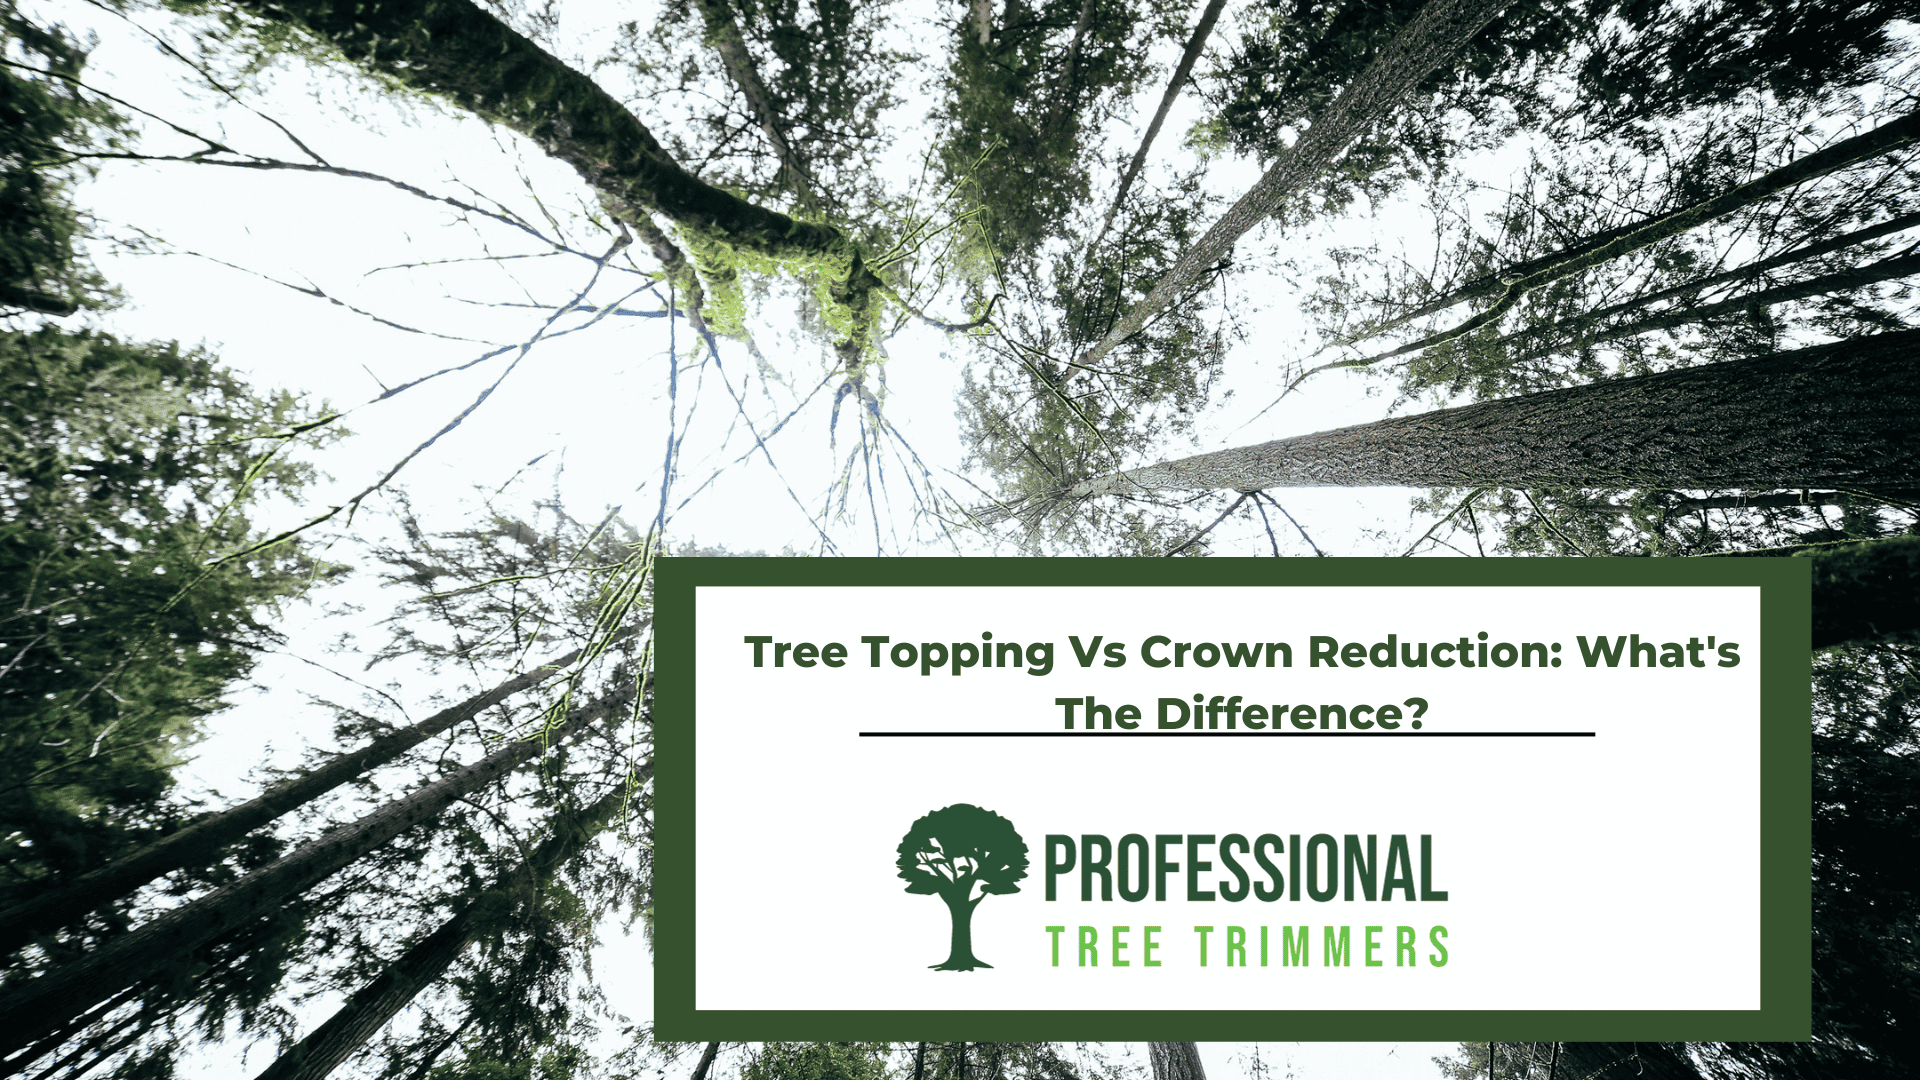 Tree Topping Vs Crown Reduction